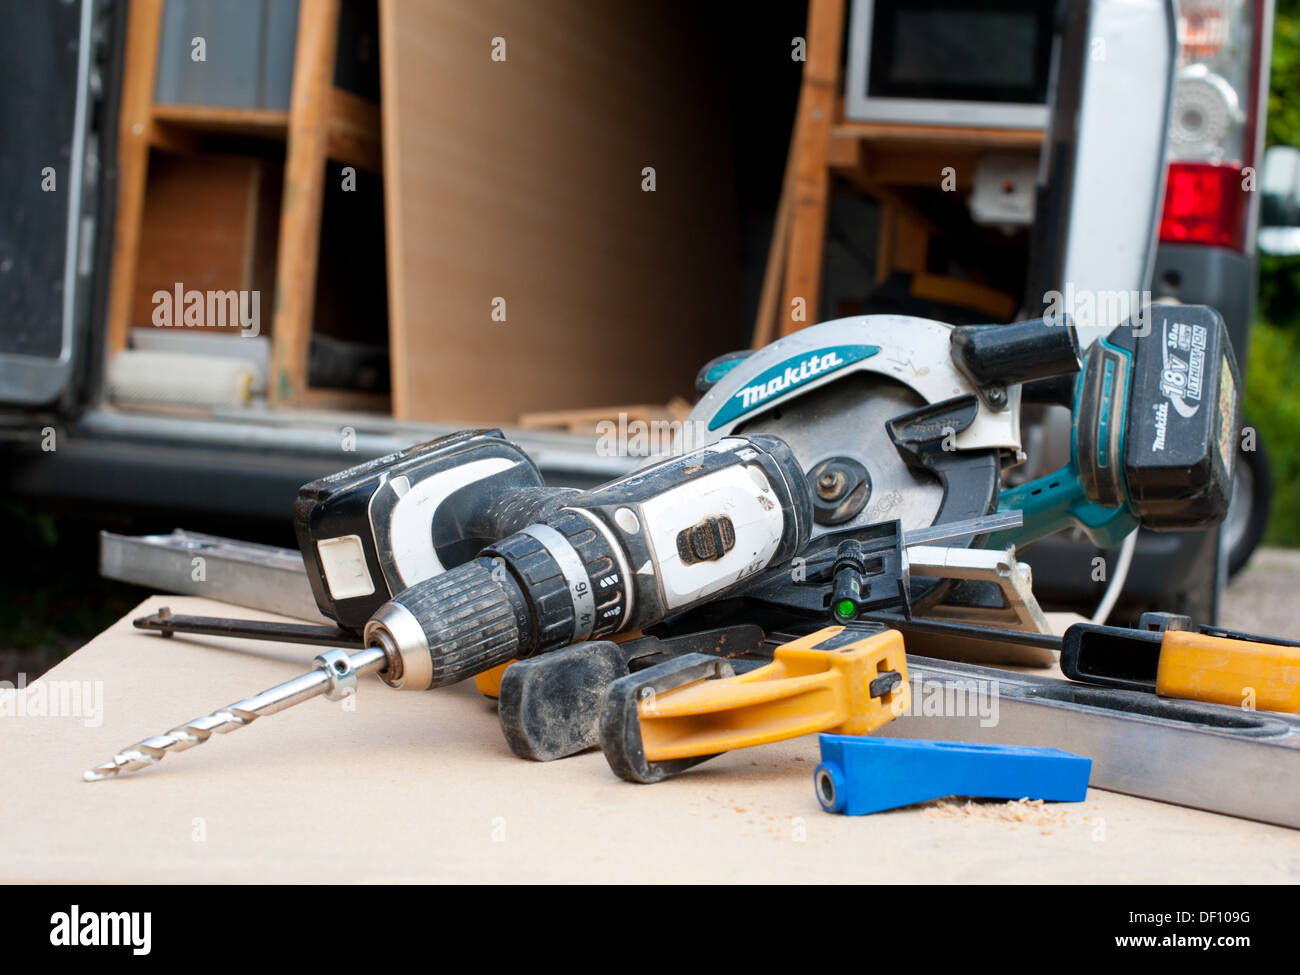 Power tools on a workbench Stock Photo